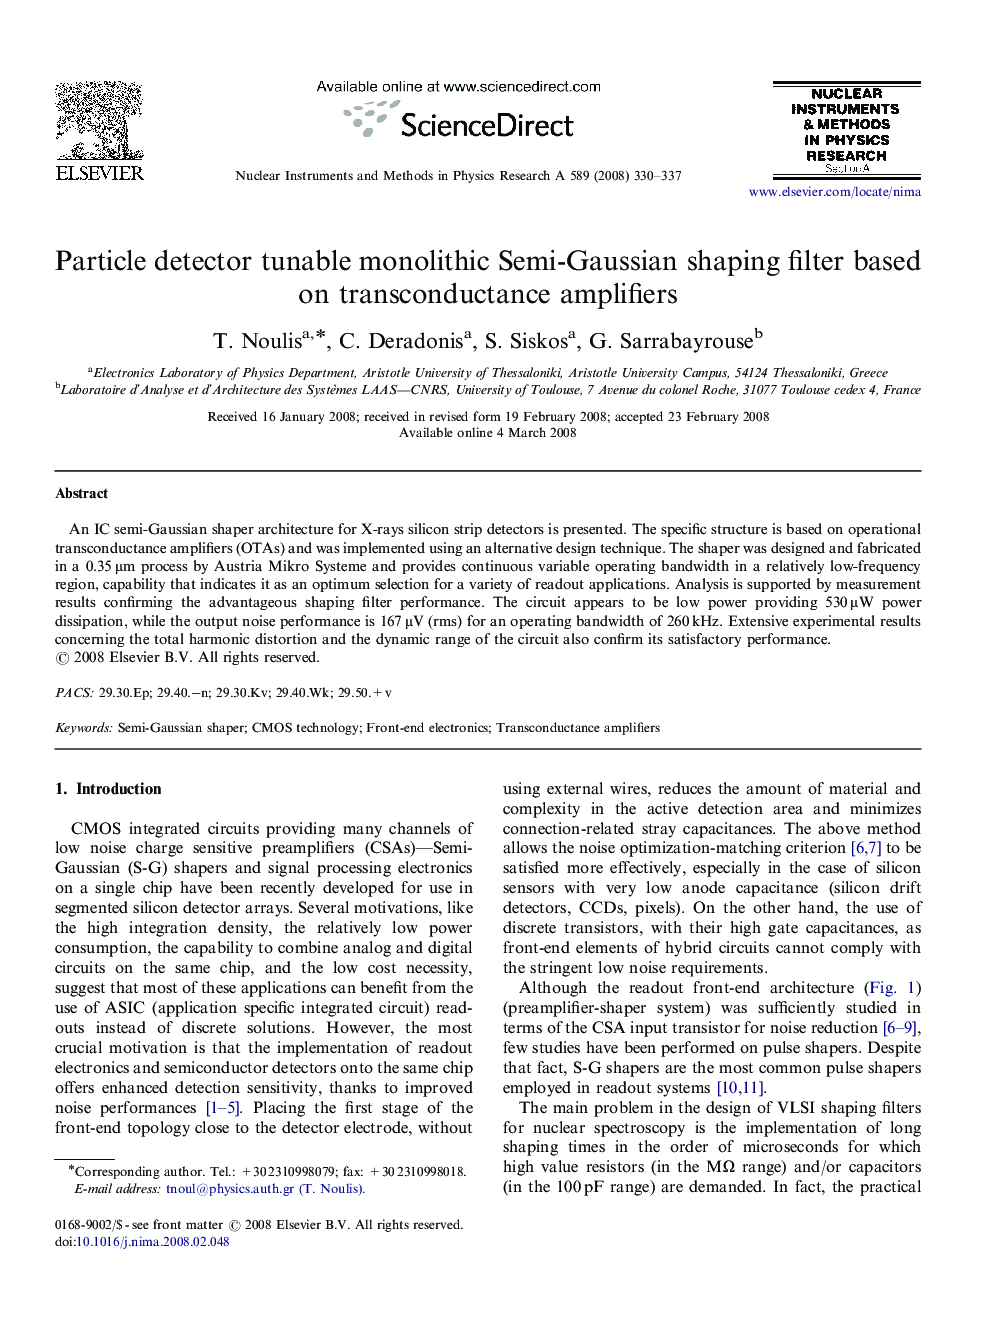 Particle detector tunable monolithic Semi-Gaussian shaping filter based on transconductance amplifiers